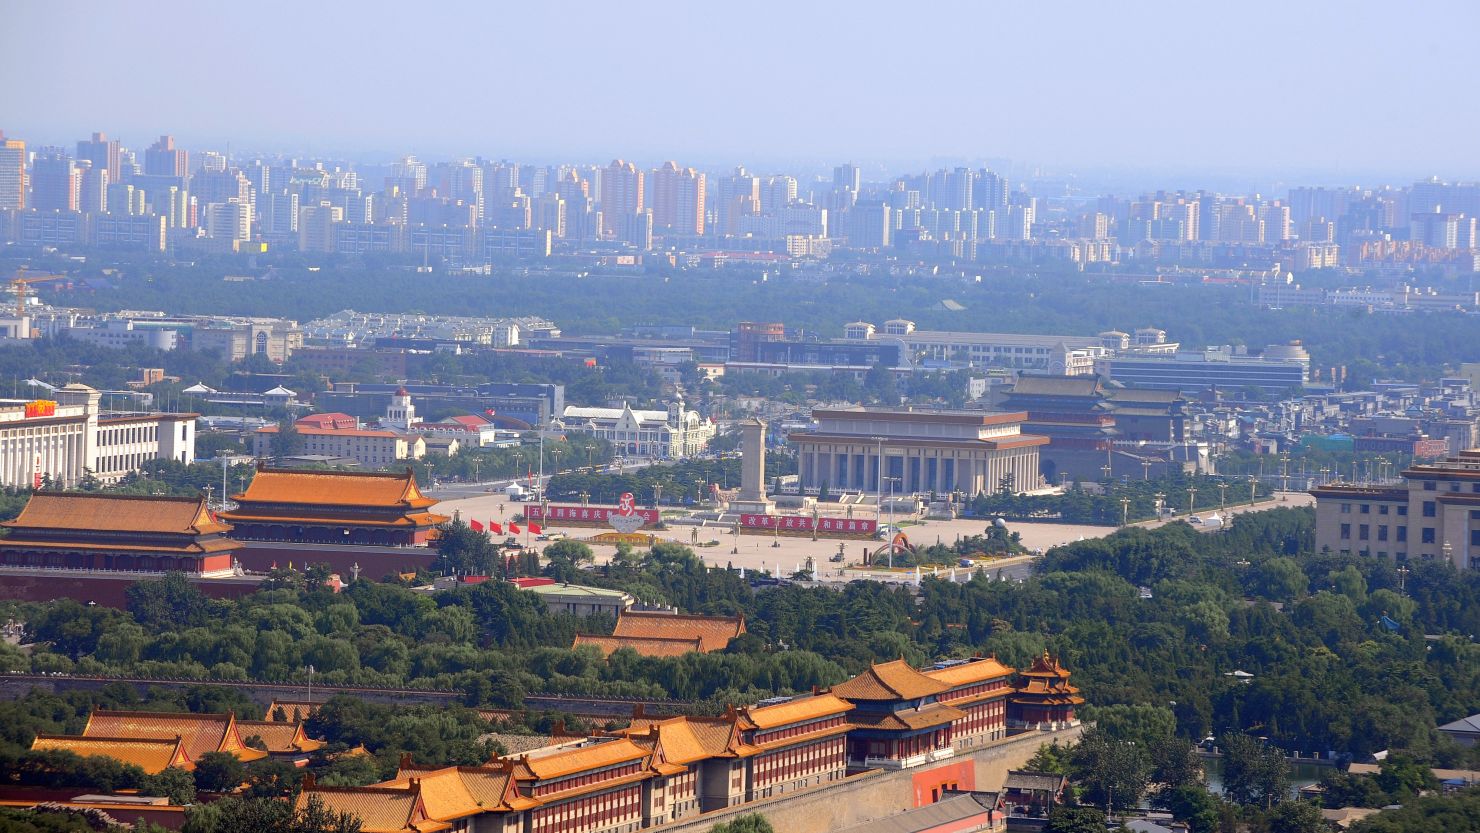 Beijing's Forbidden City and Tiananmen Square in the Chinese capital, taken in 2008.